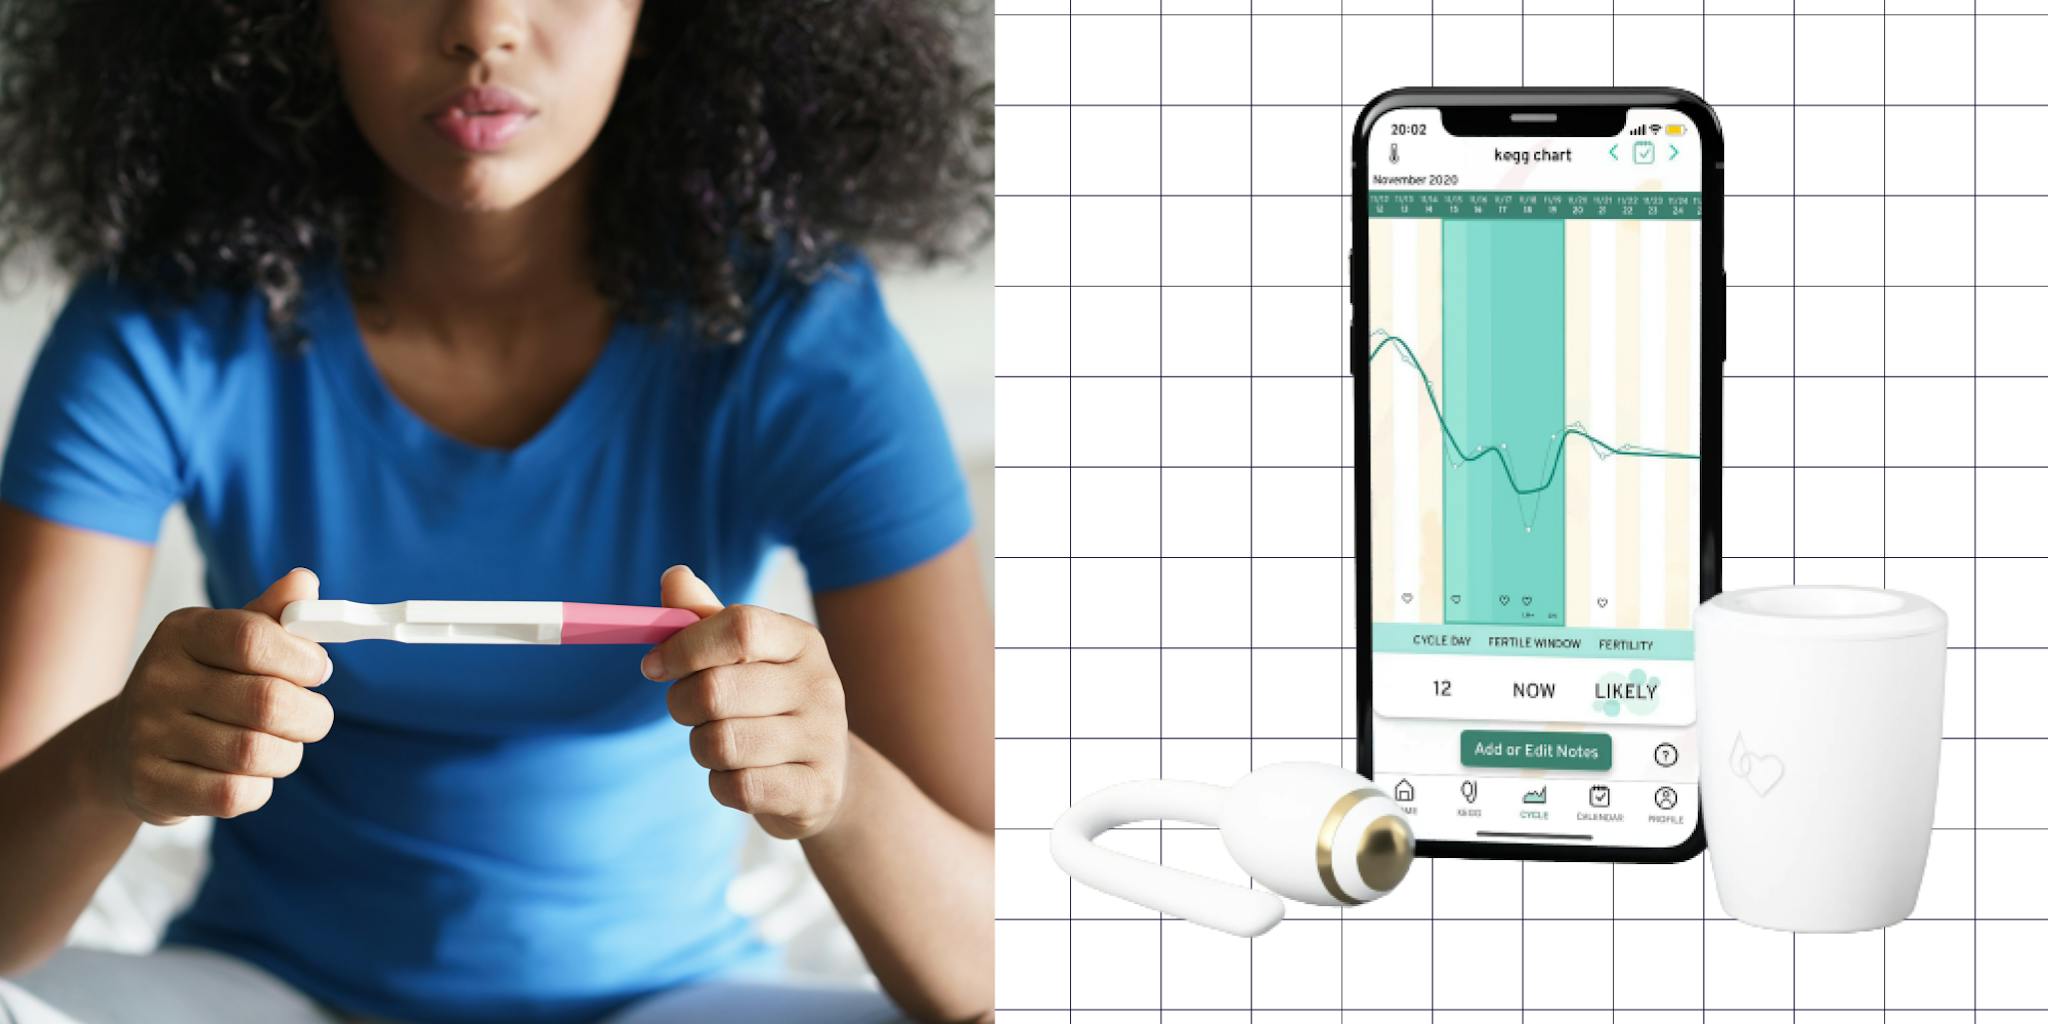 When you’re trying for a baby, set yourself up for success with the Kegg fertility tracker